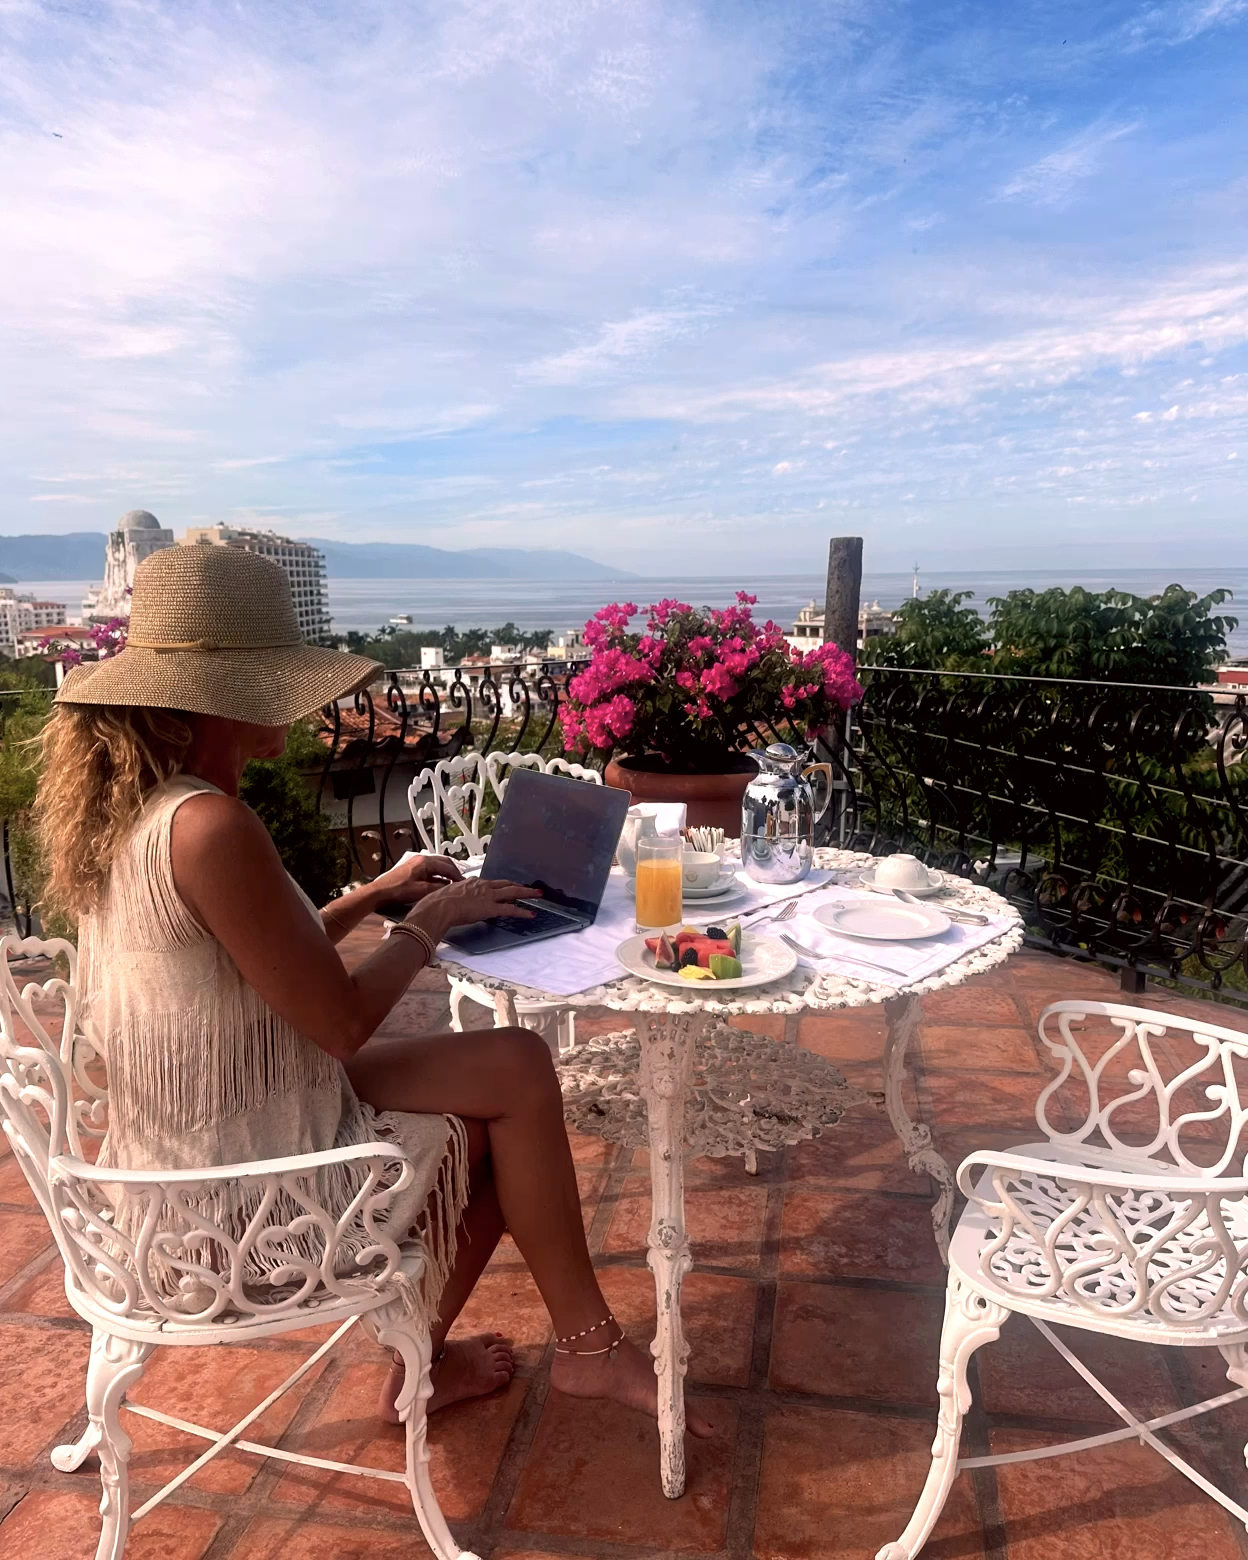 A woman sits on a terrace, enjoying breakfast while working on her laptop, surrounded by bougainvillea and overlooking Banderas Bay in the morning.